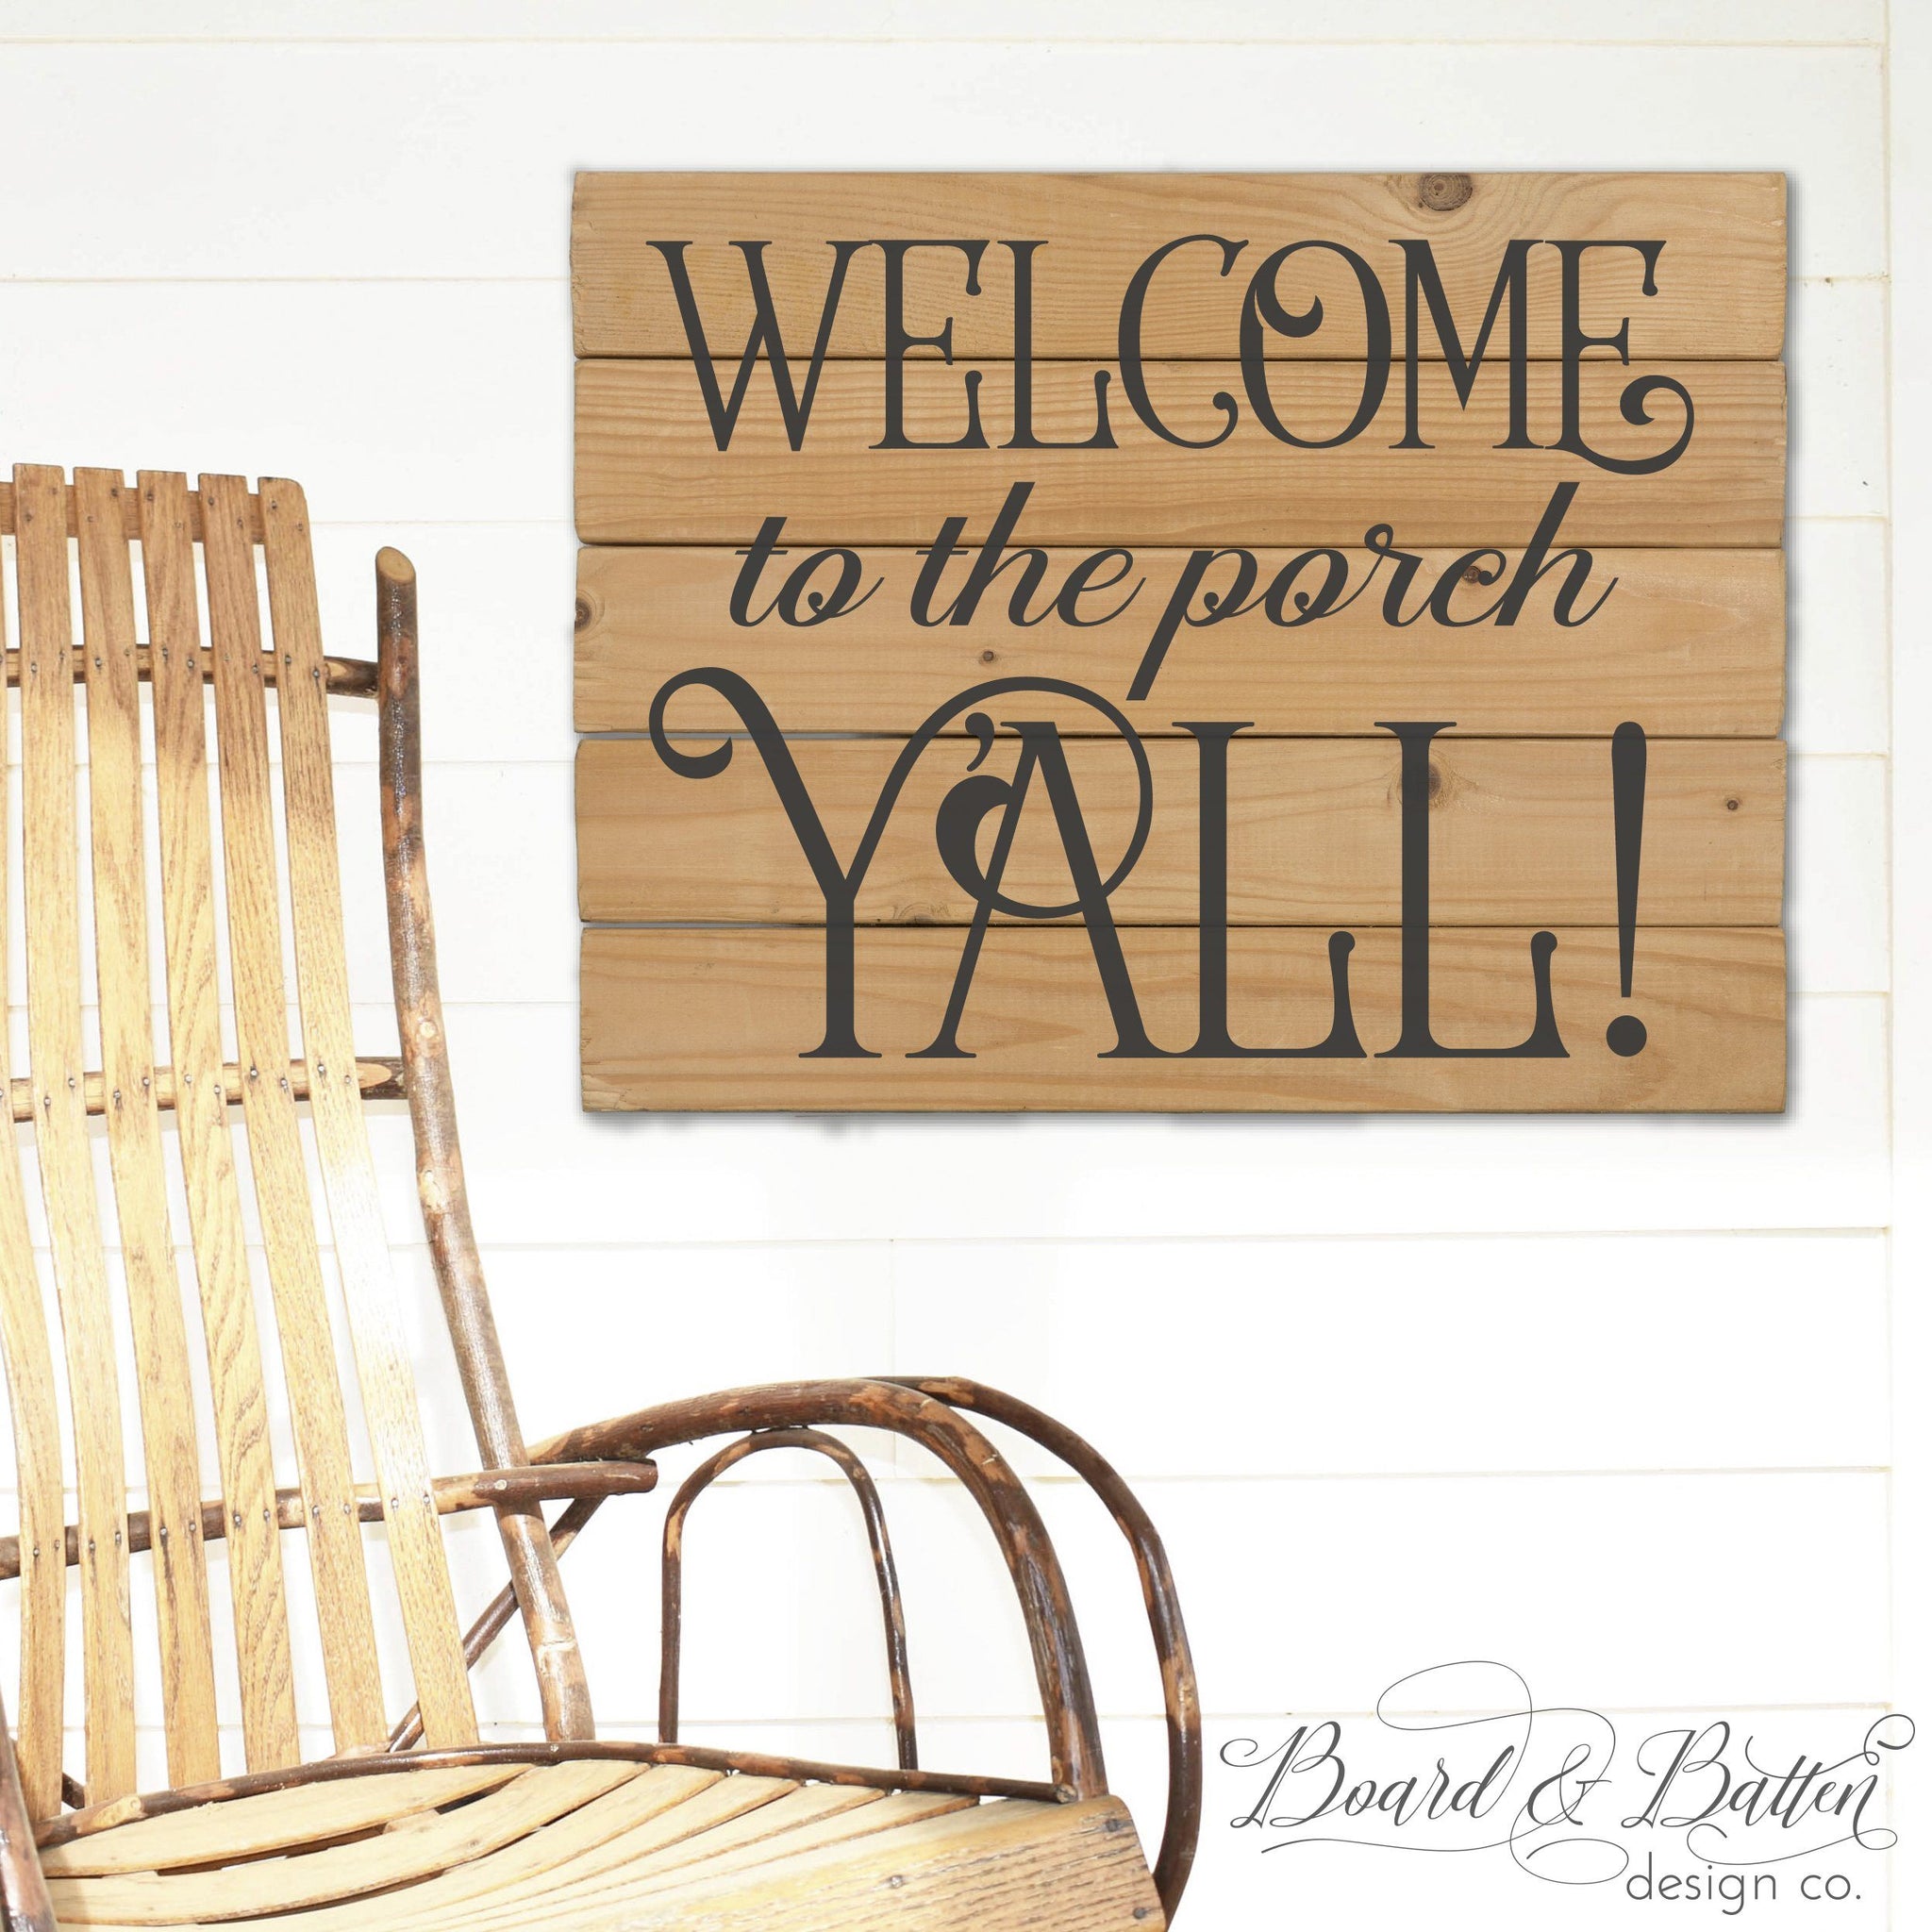 Welcome to the Porch Y'all! SVG File - Commercial Use SVG Files for Cricut & Silhouette